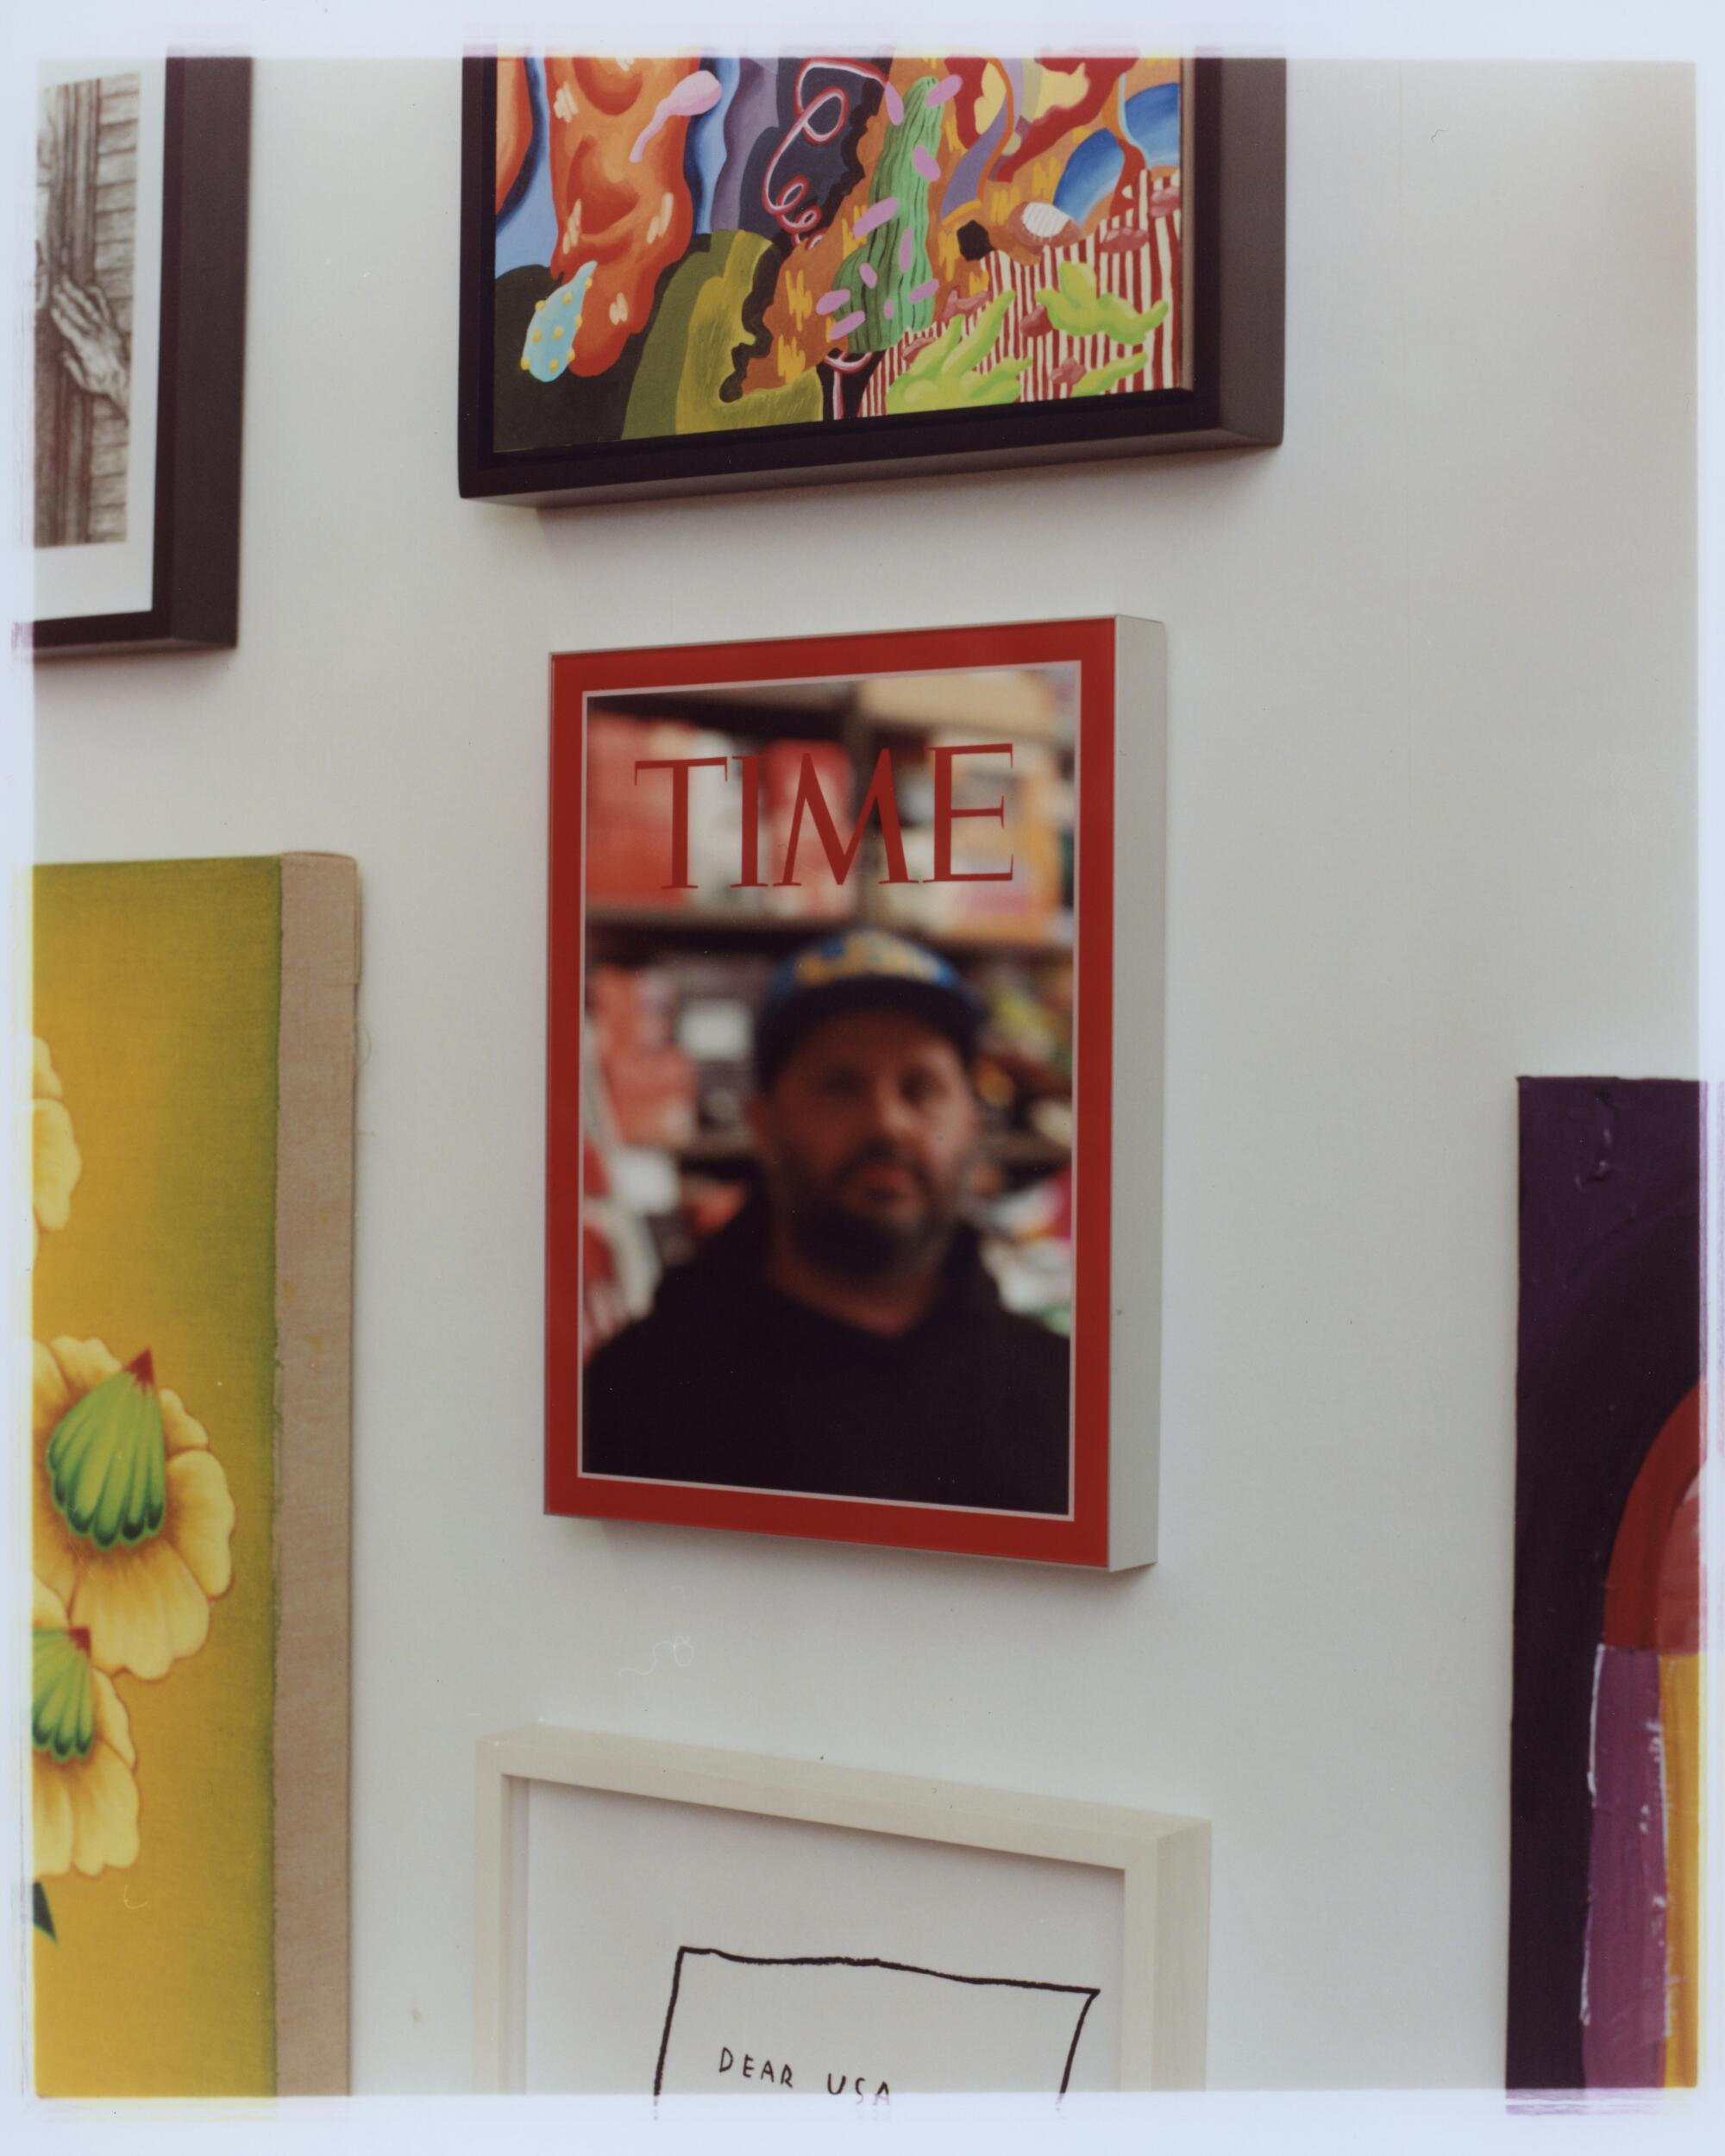 A bearded man in a baseball cap reflected in a mirrored fake Time magazine cover hanging on a wall